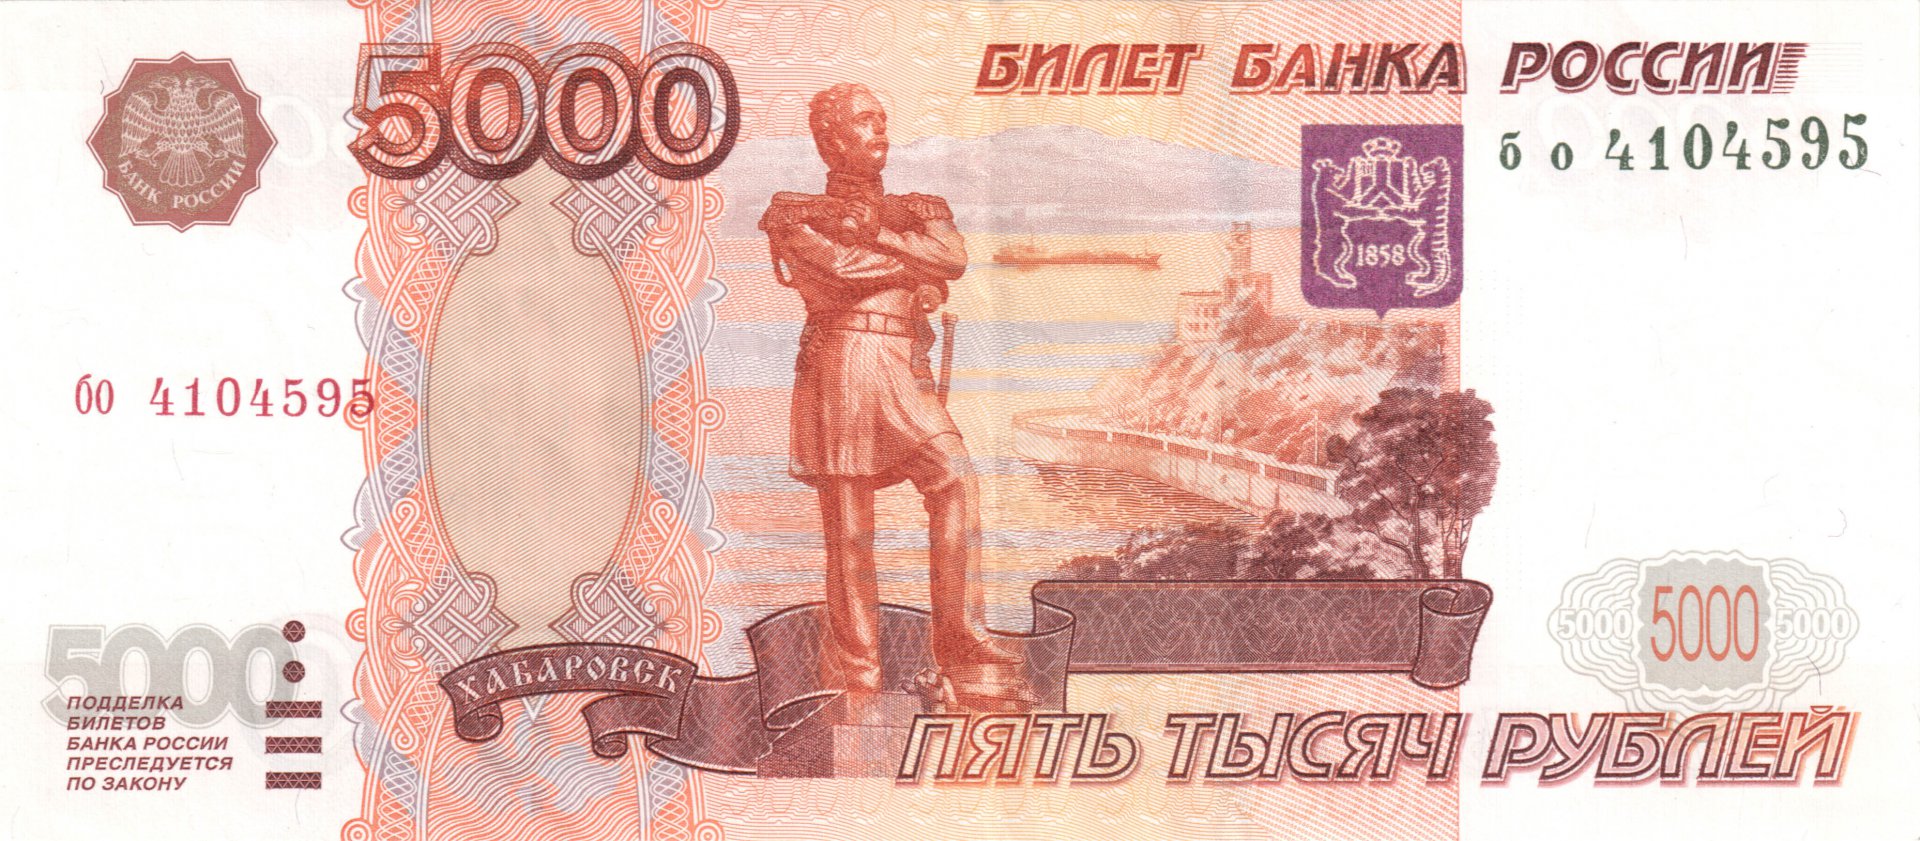 Banknote_5000_rubles_(1997)_front.jpg